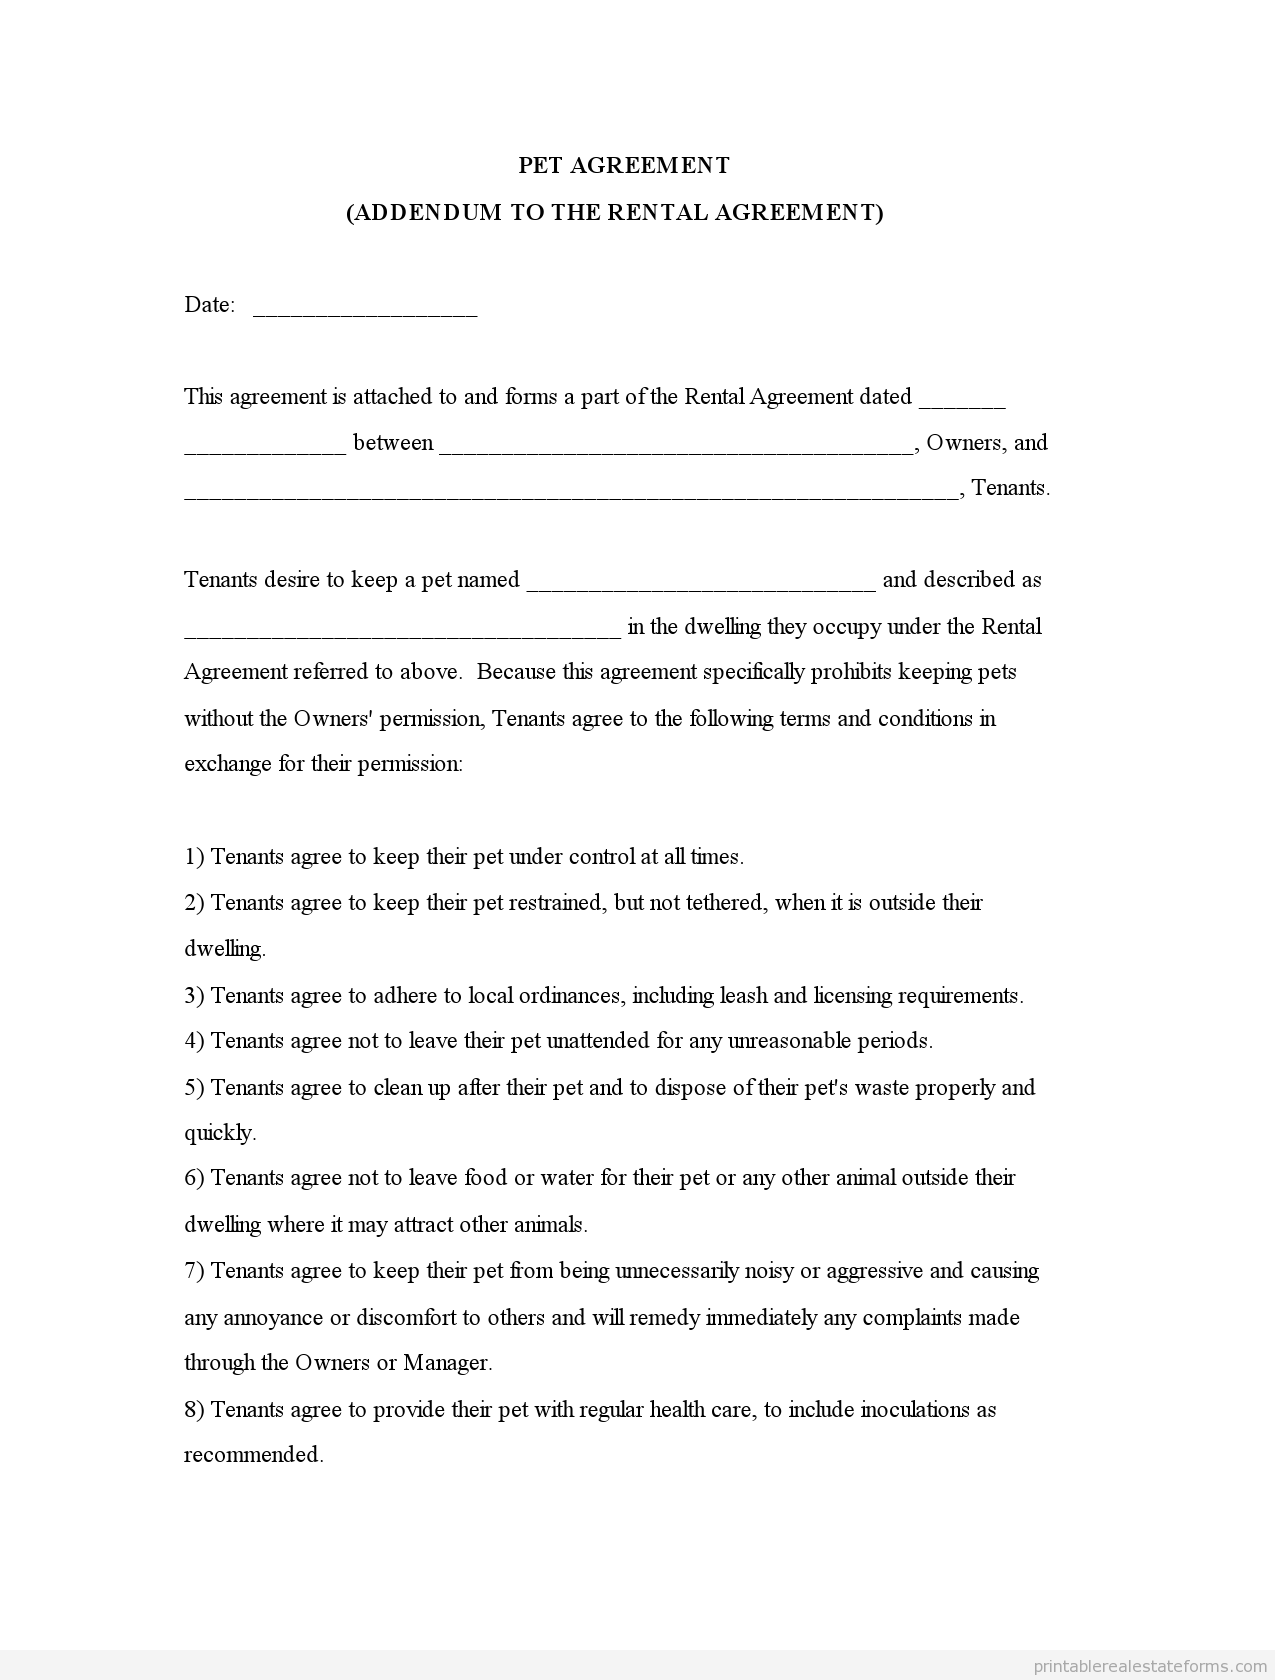 Sample Pet Agreement Forms 9+ Free Documents in PDF